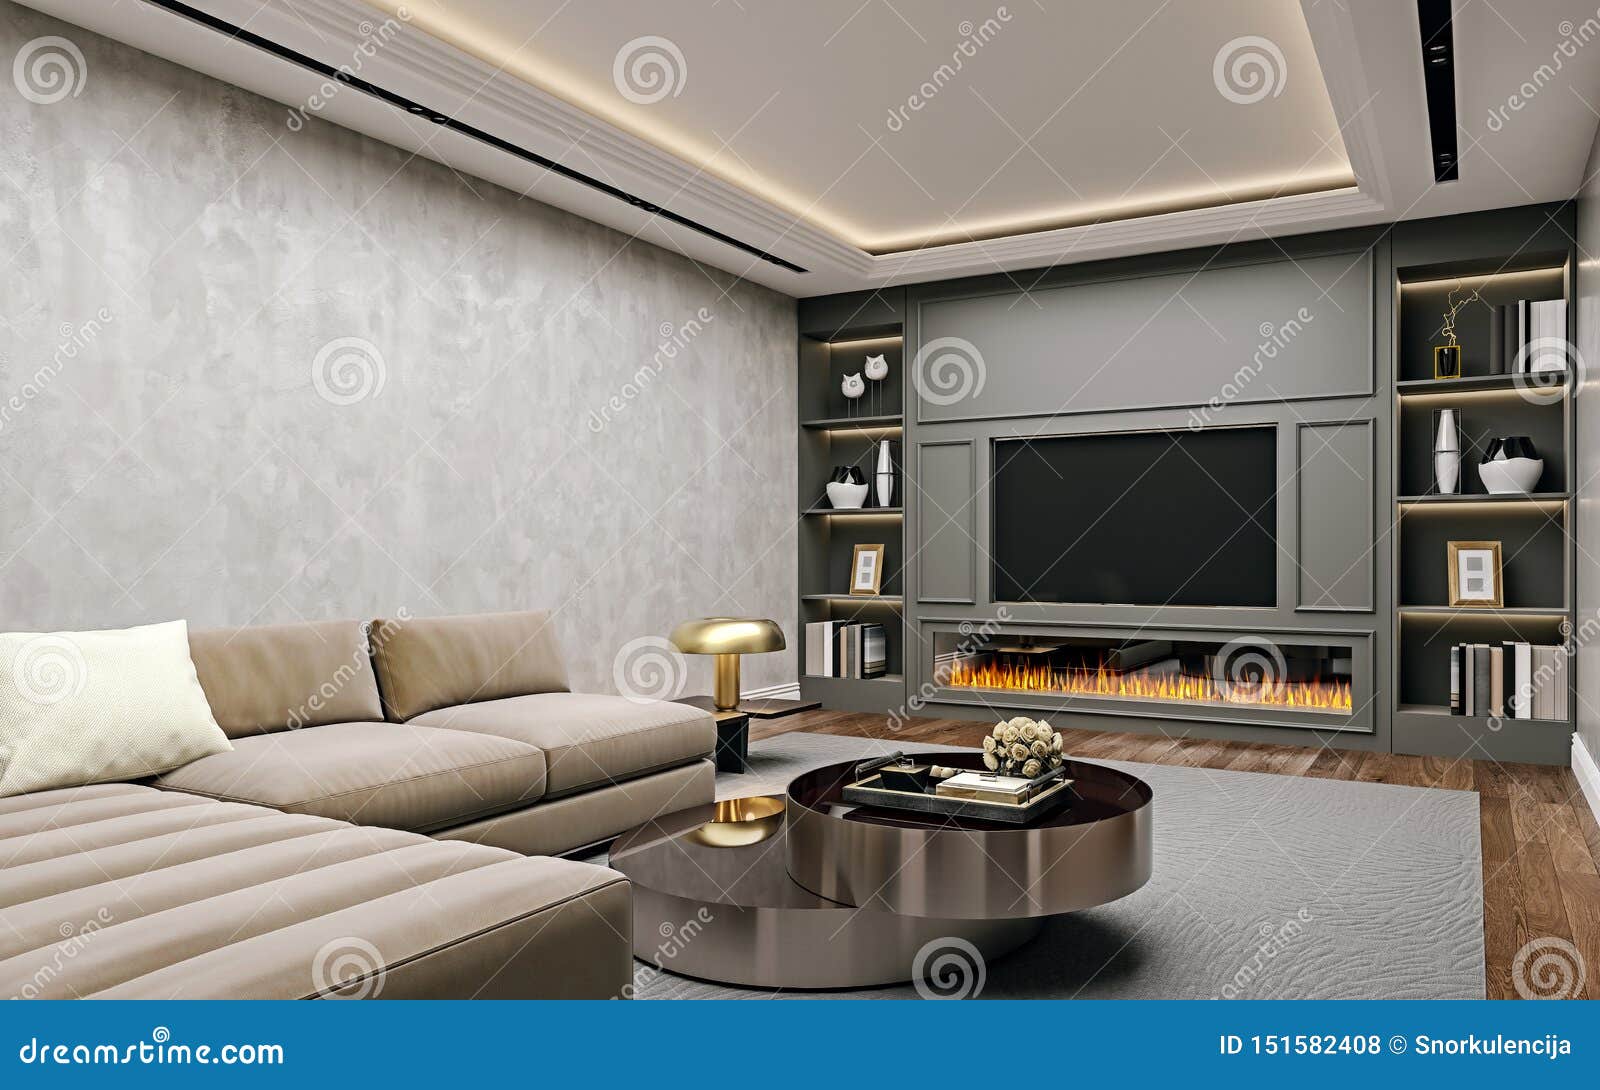 modern interior  of living room in basement, angled close up view of tv wall with book shelves, stucco plaster